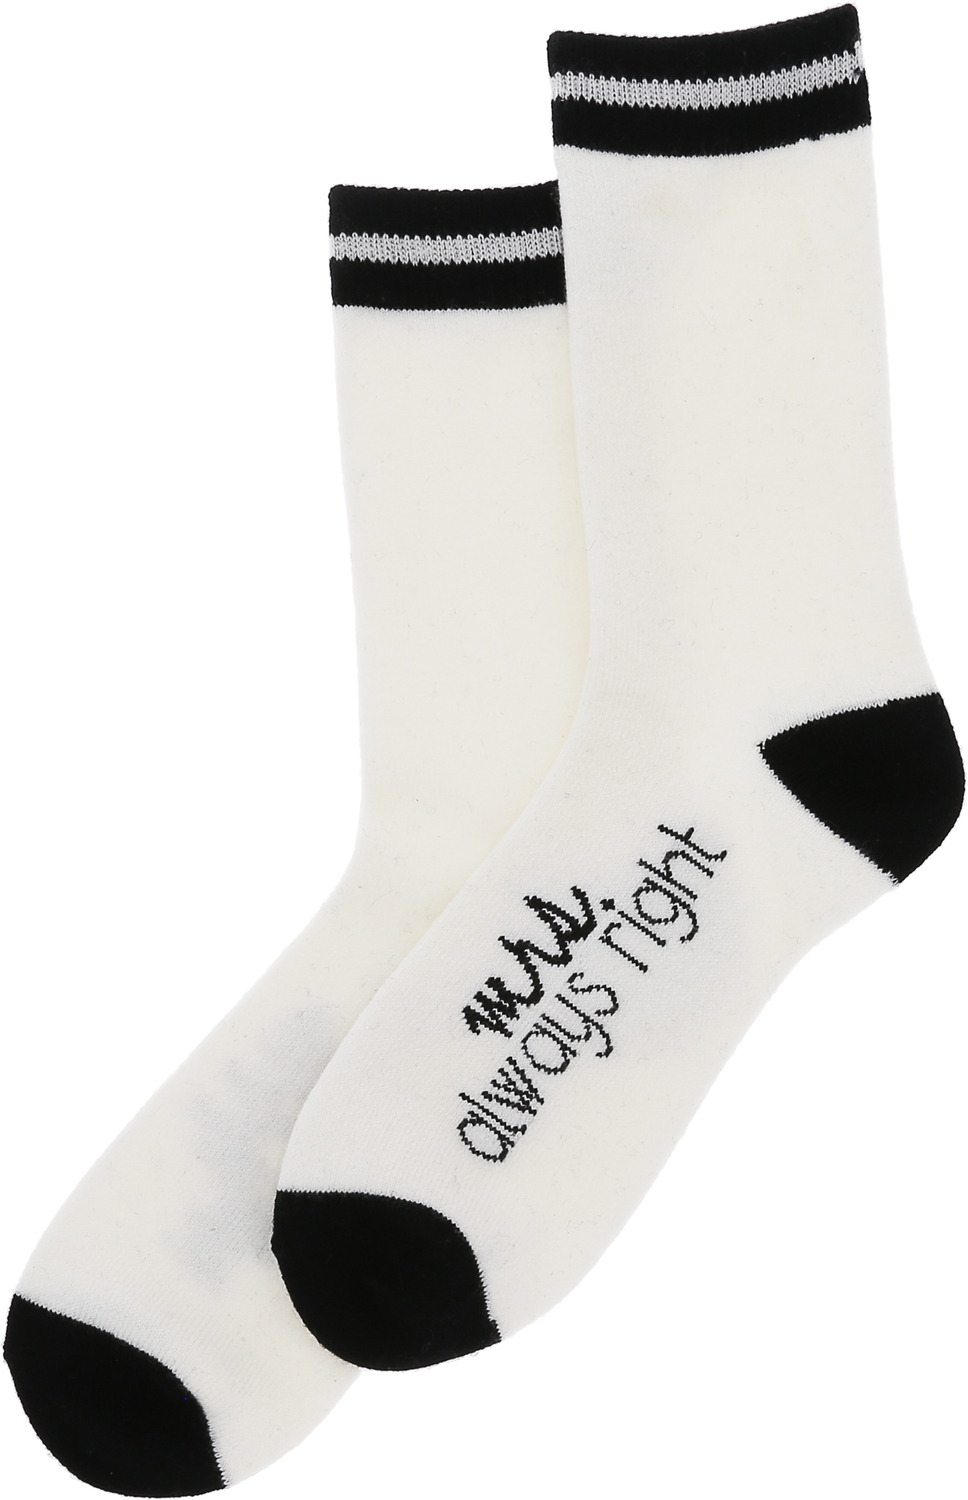 Mrs. Always Right by Love Grows - Mrs. Always Right - Ladies Crew Sock